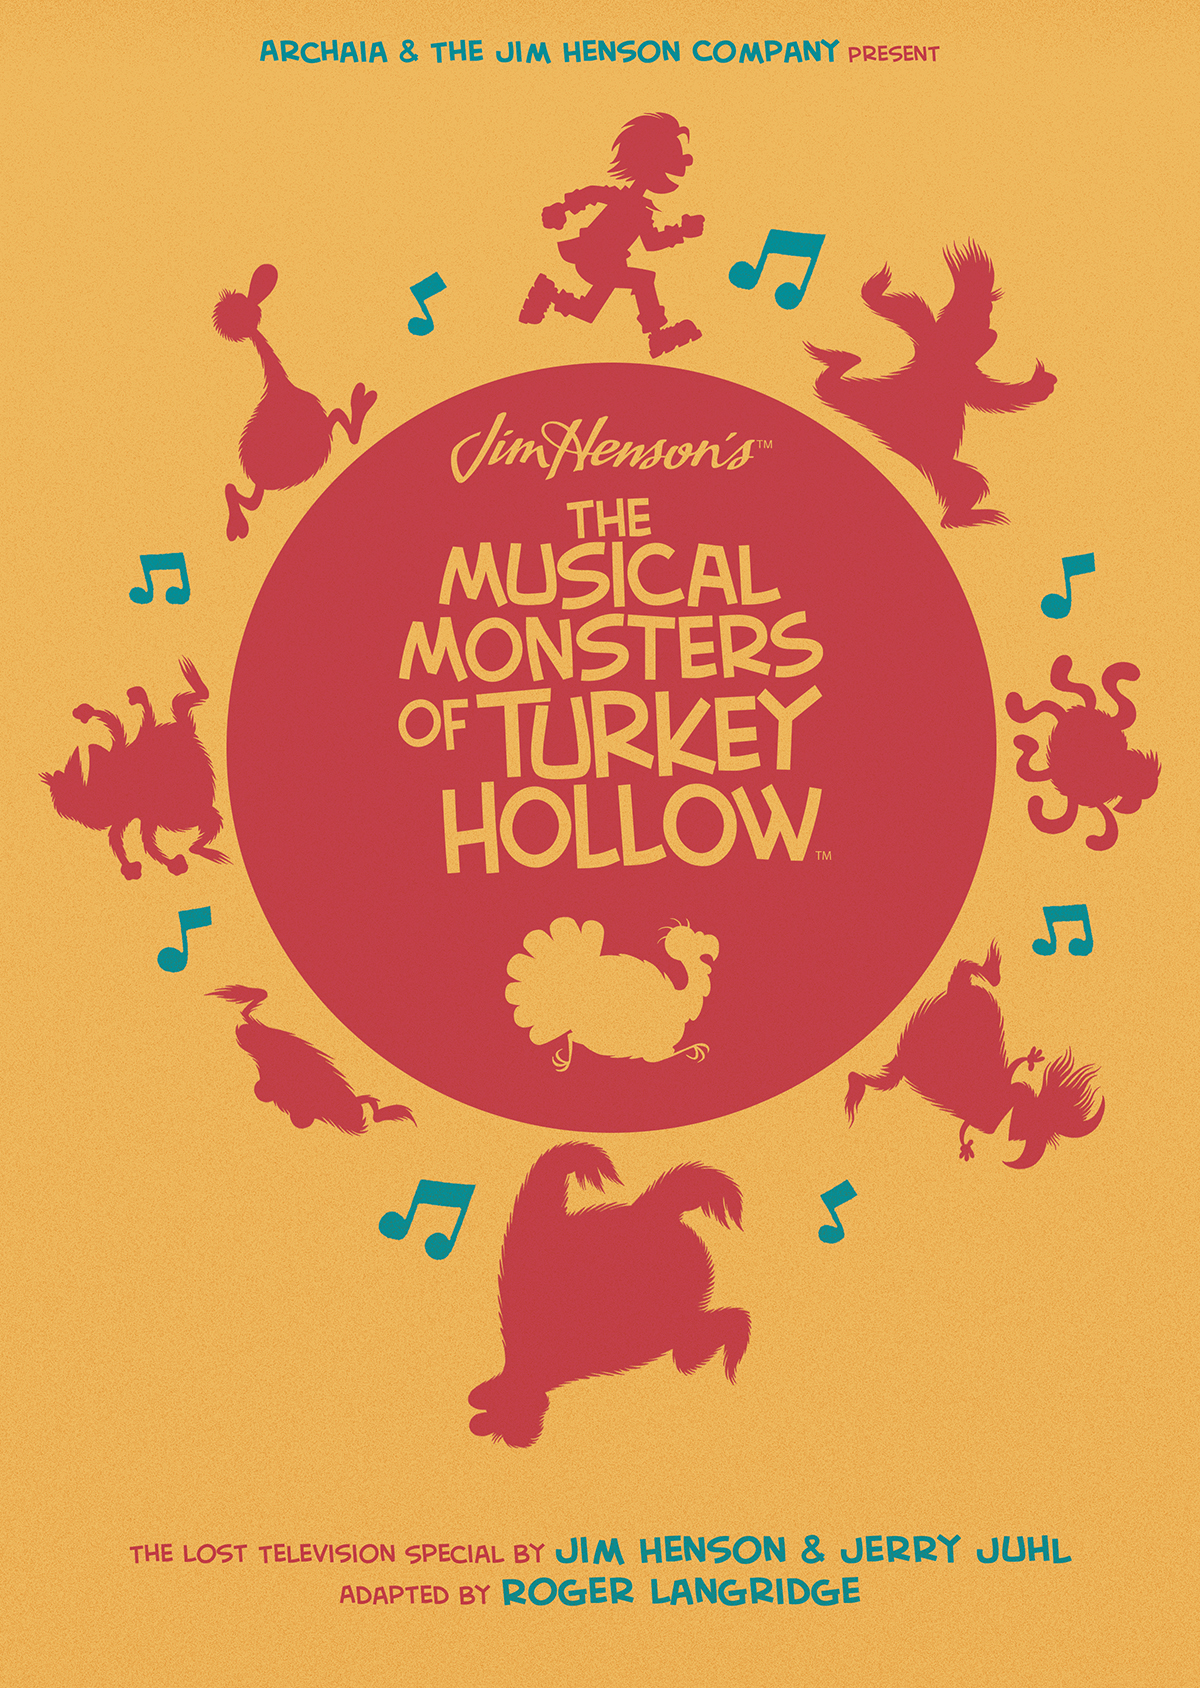 JIM HENSON'S THE MUSICAL MONSTERS OF TURKEY HOLLOW PREVIEW